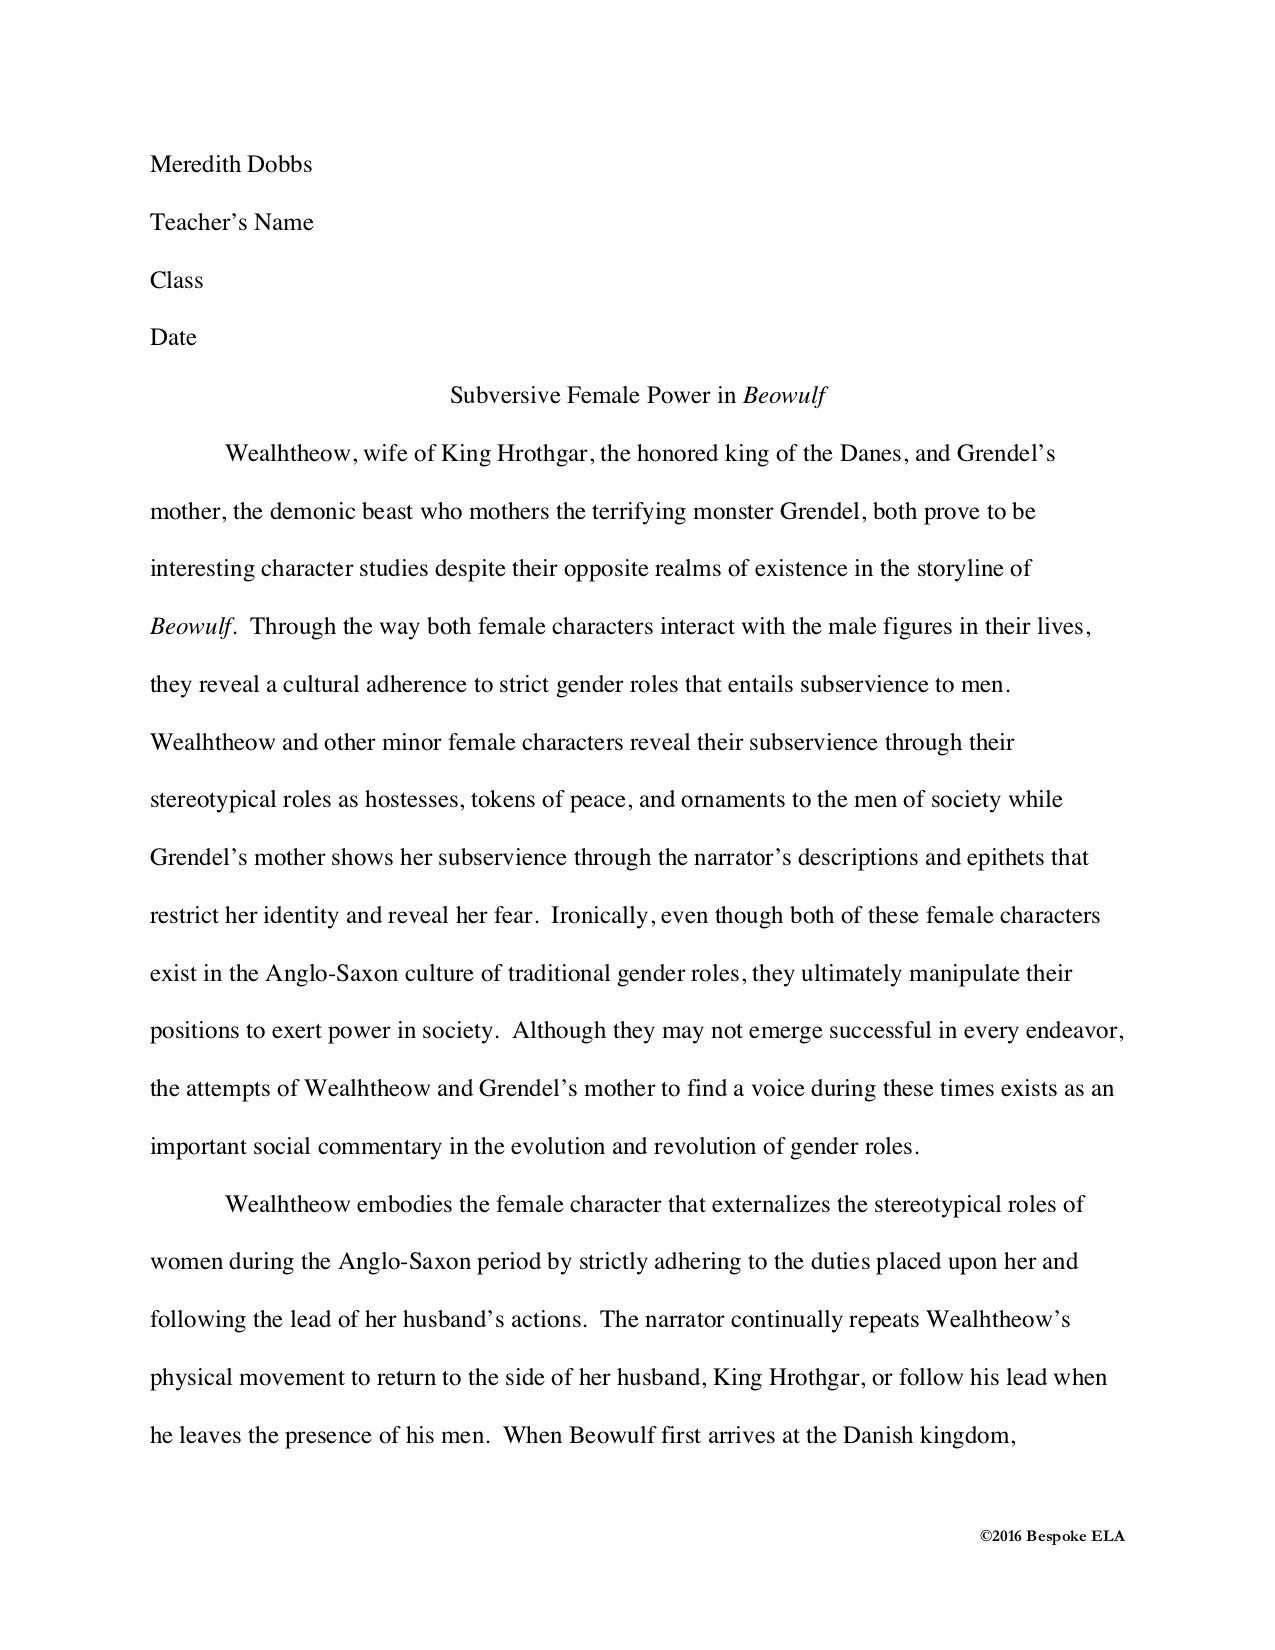 paper about literary analysis